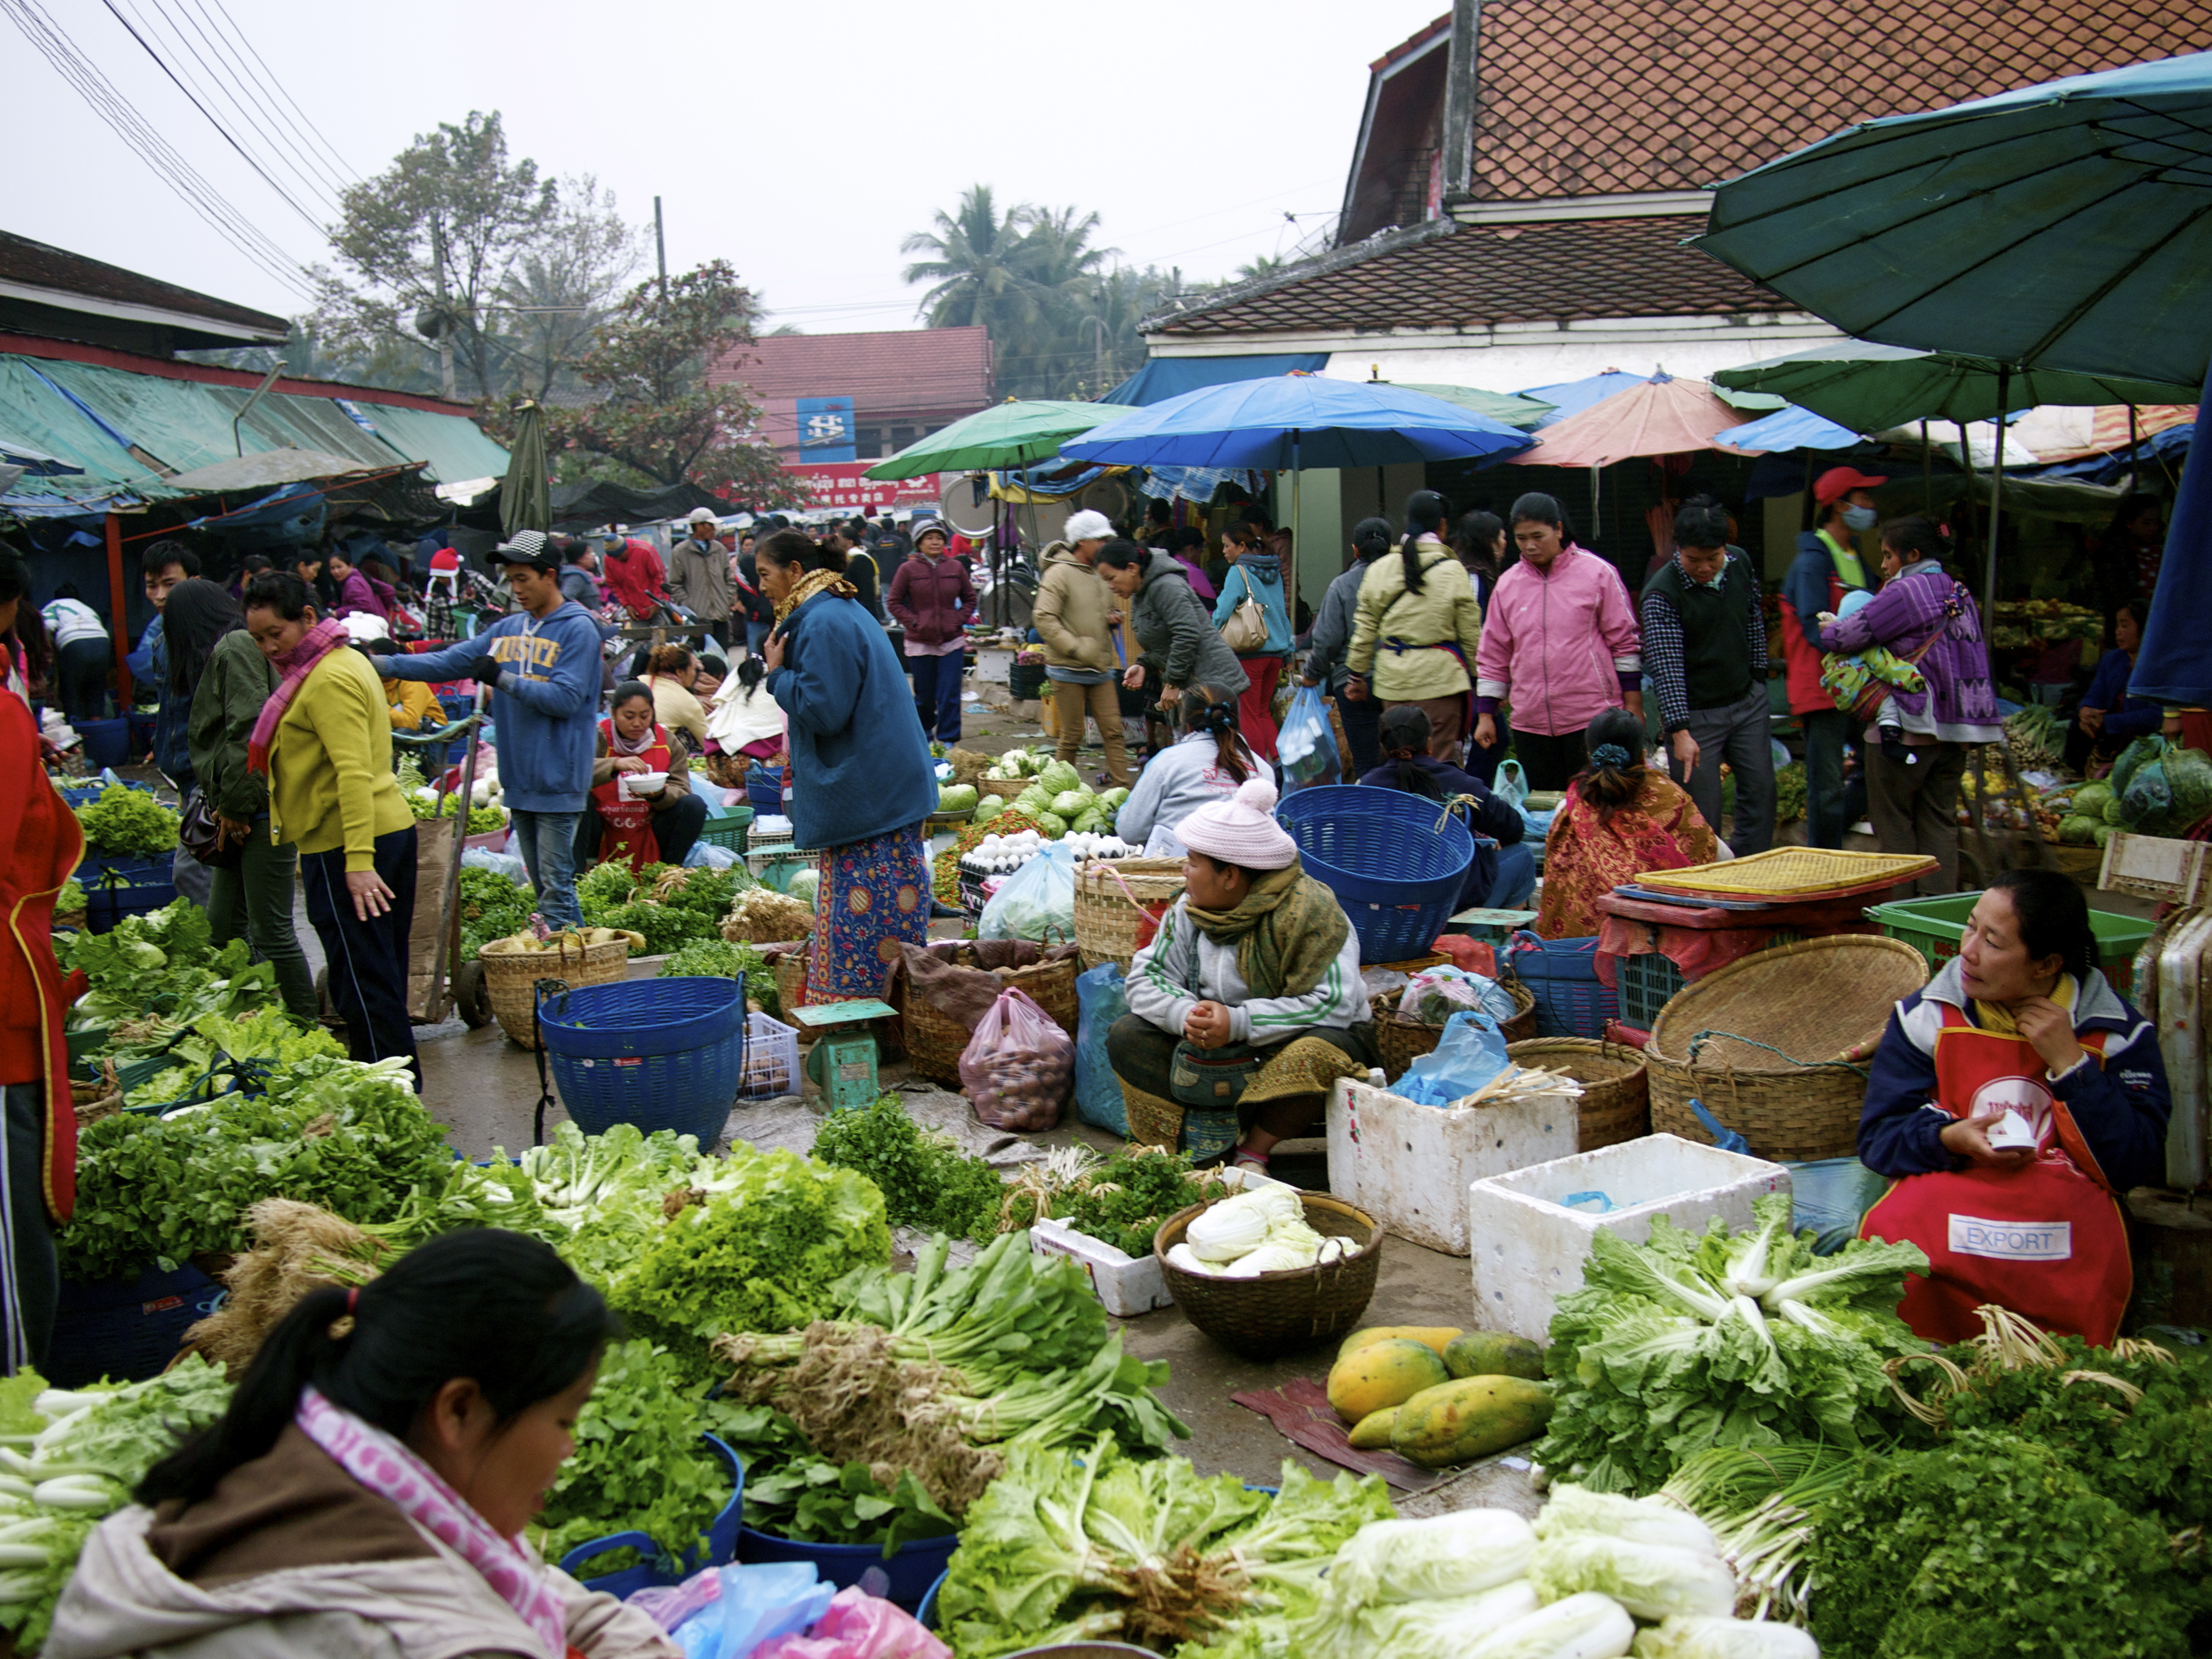 Lao people prefer imported fruit and vegetables